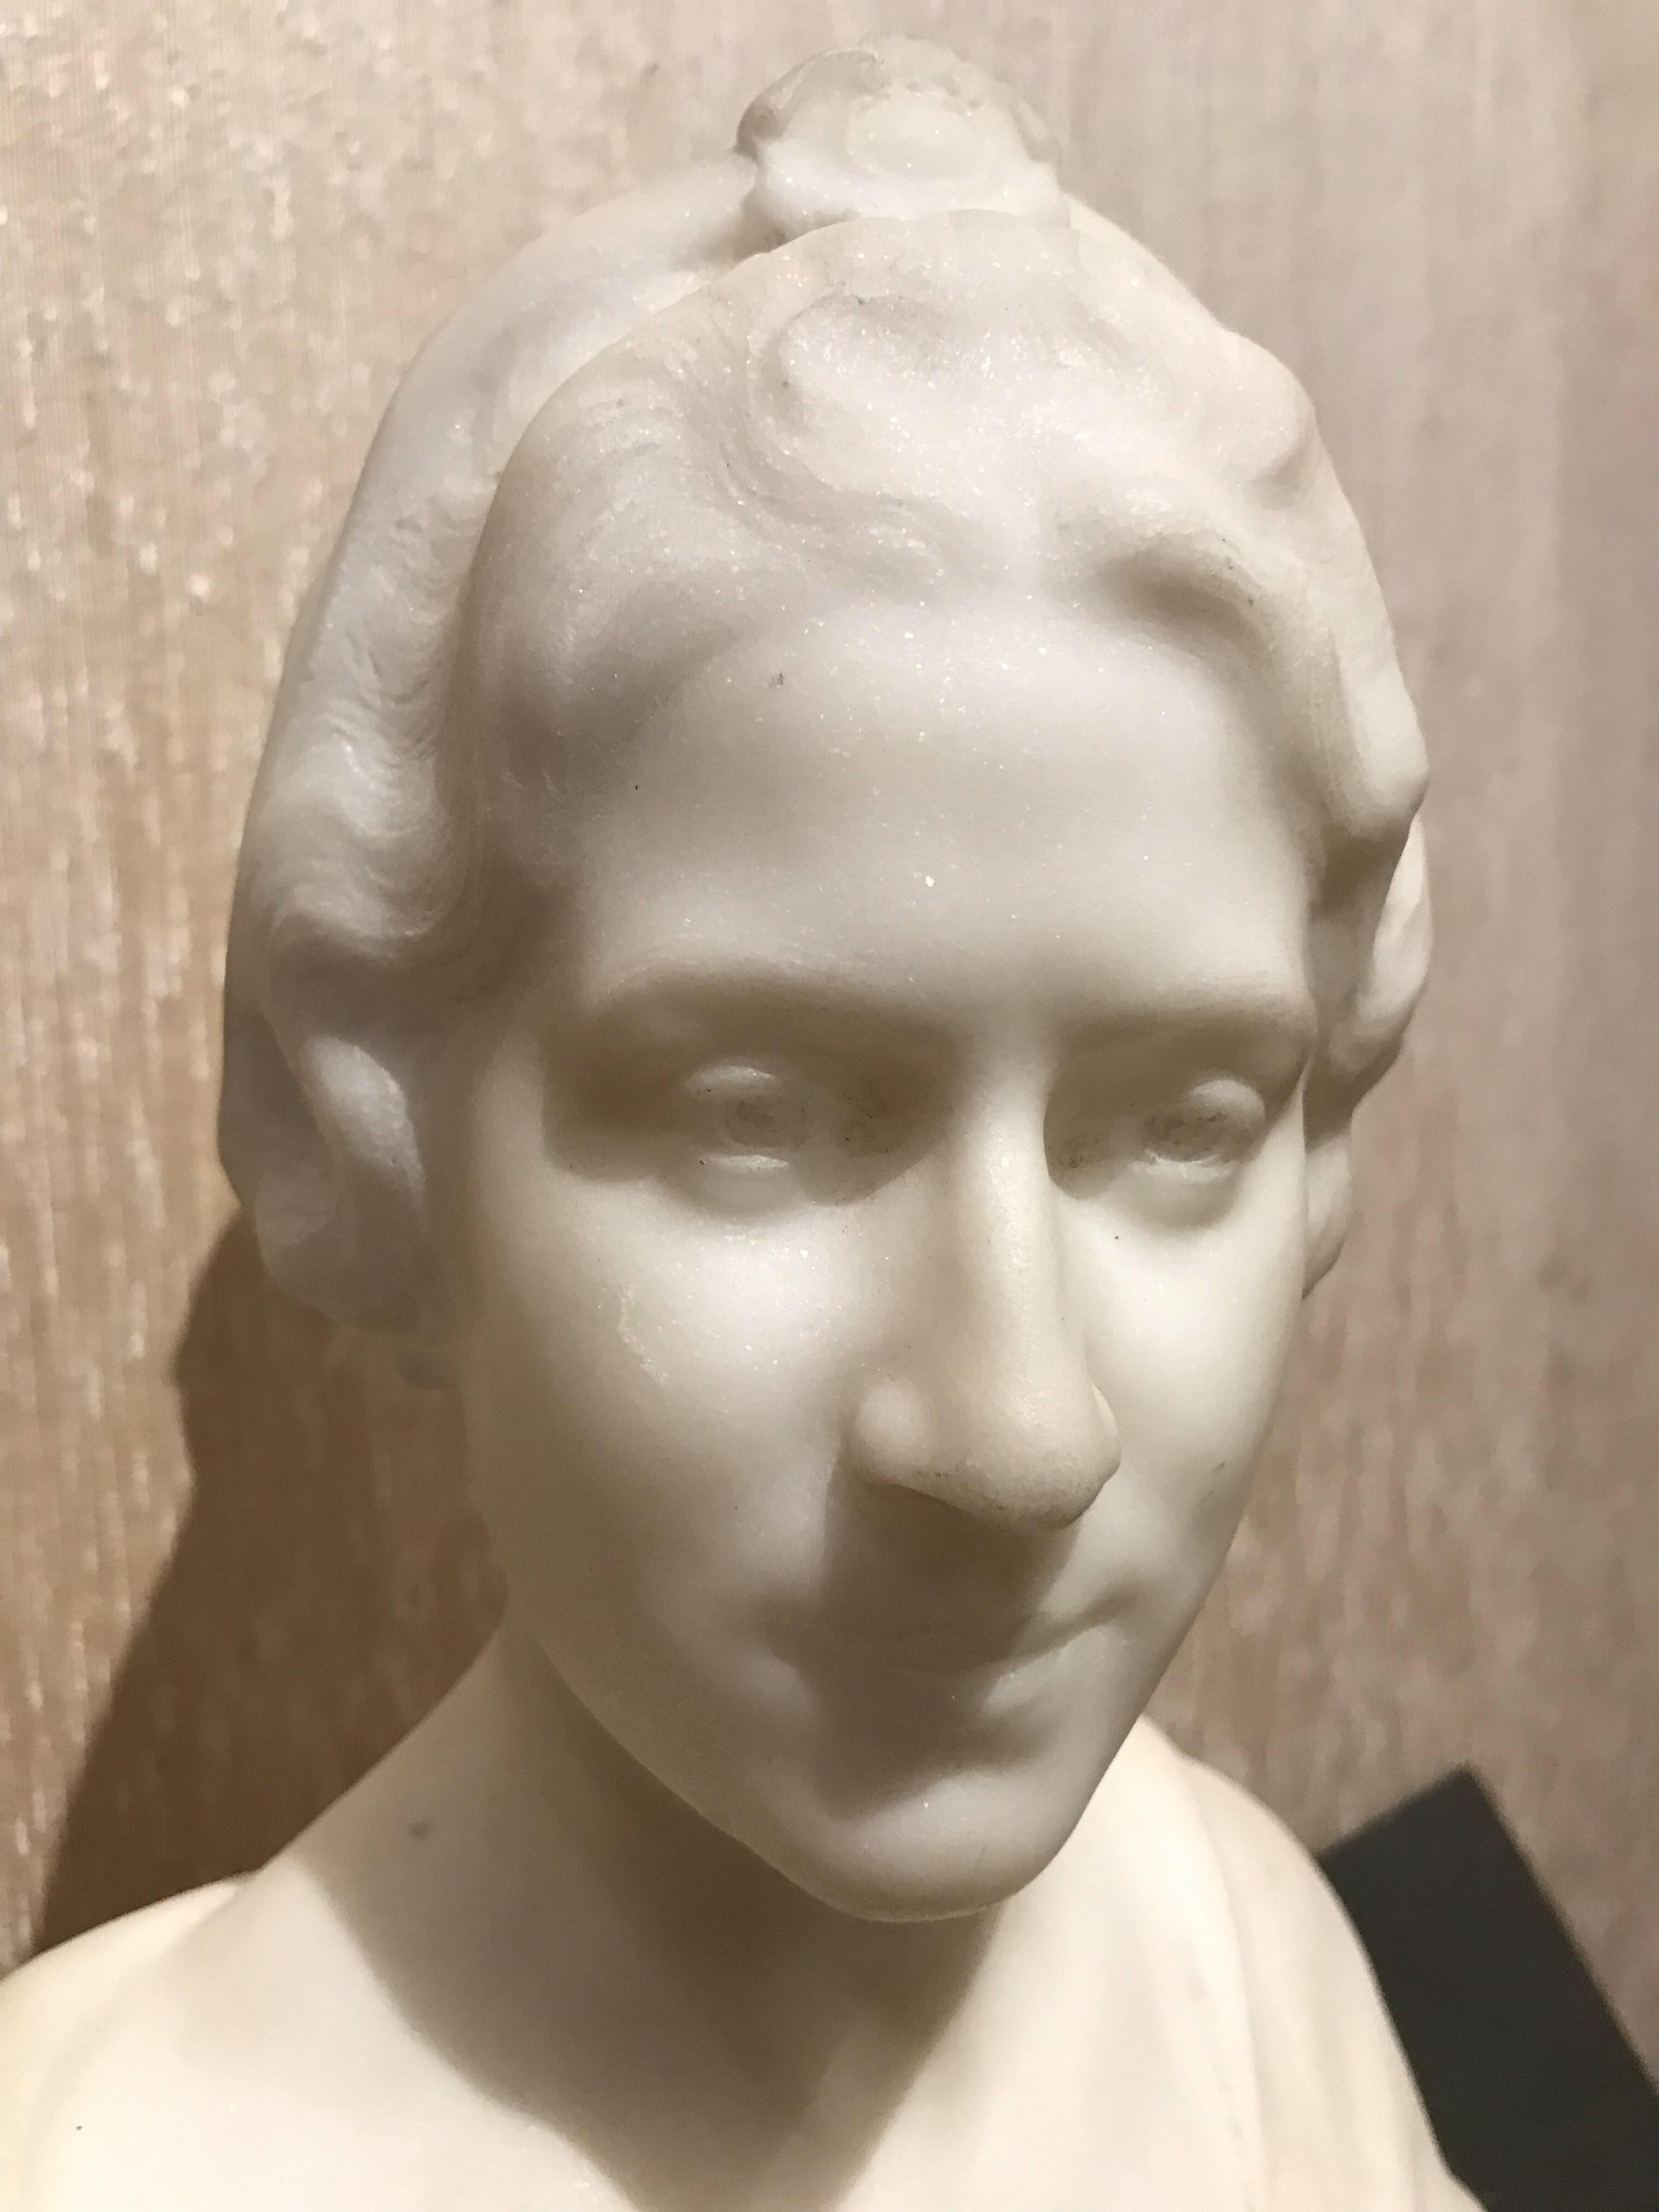 Fine work of good expressive power. Spectacular Wall Sculpture “Bust of a Lady” made of white marble is from France, Europe.
Art Nouveau approx. 1900-10
Signed: Aug. Maillard
Scuptor: Auguste Maillard, France, 1864-1944.